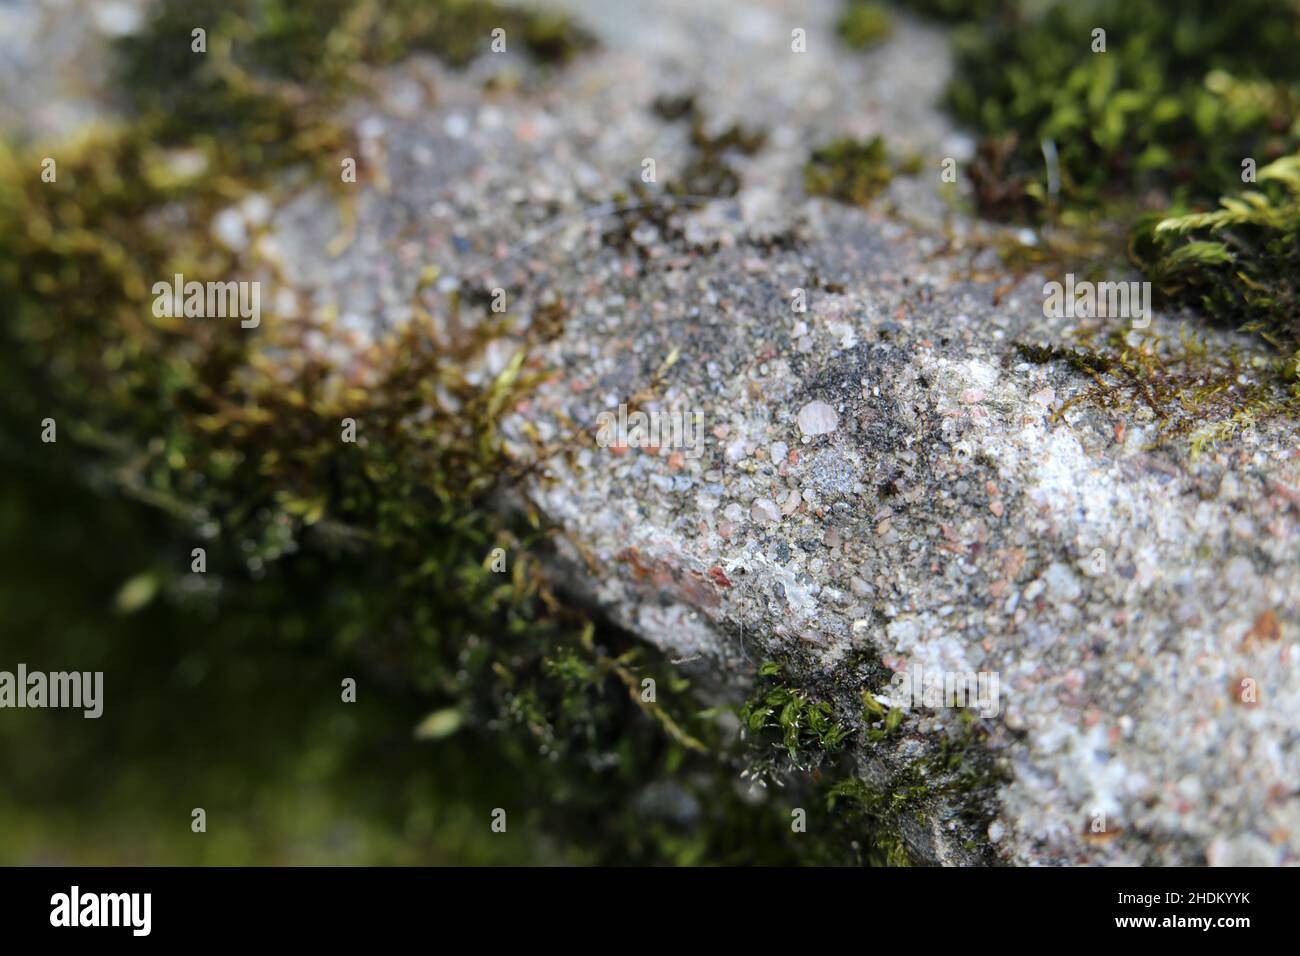 Closeup of some green moss on a rock. The most common moss species in Finland called Seinäsammal (Pleurozium schreberi) and red-stemmed feathermoss. Stock Photo